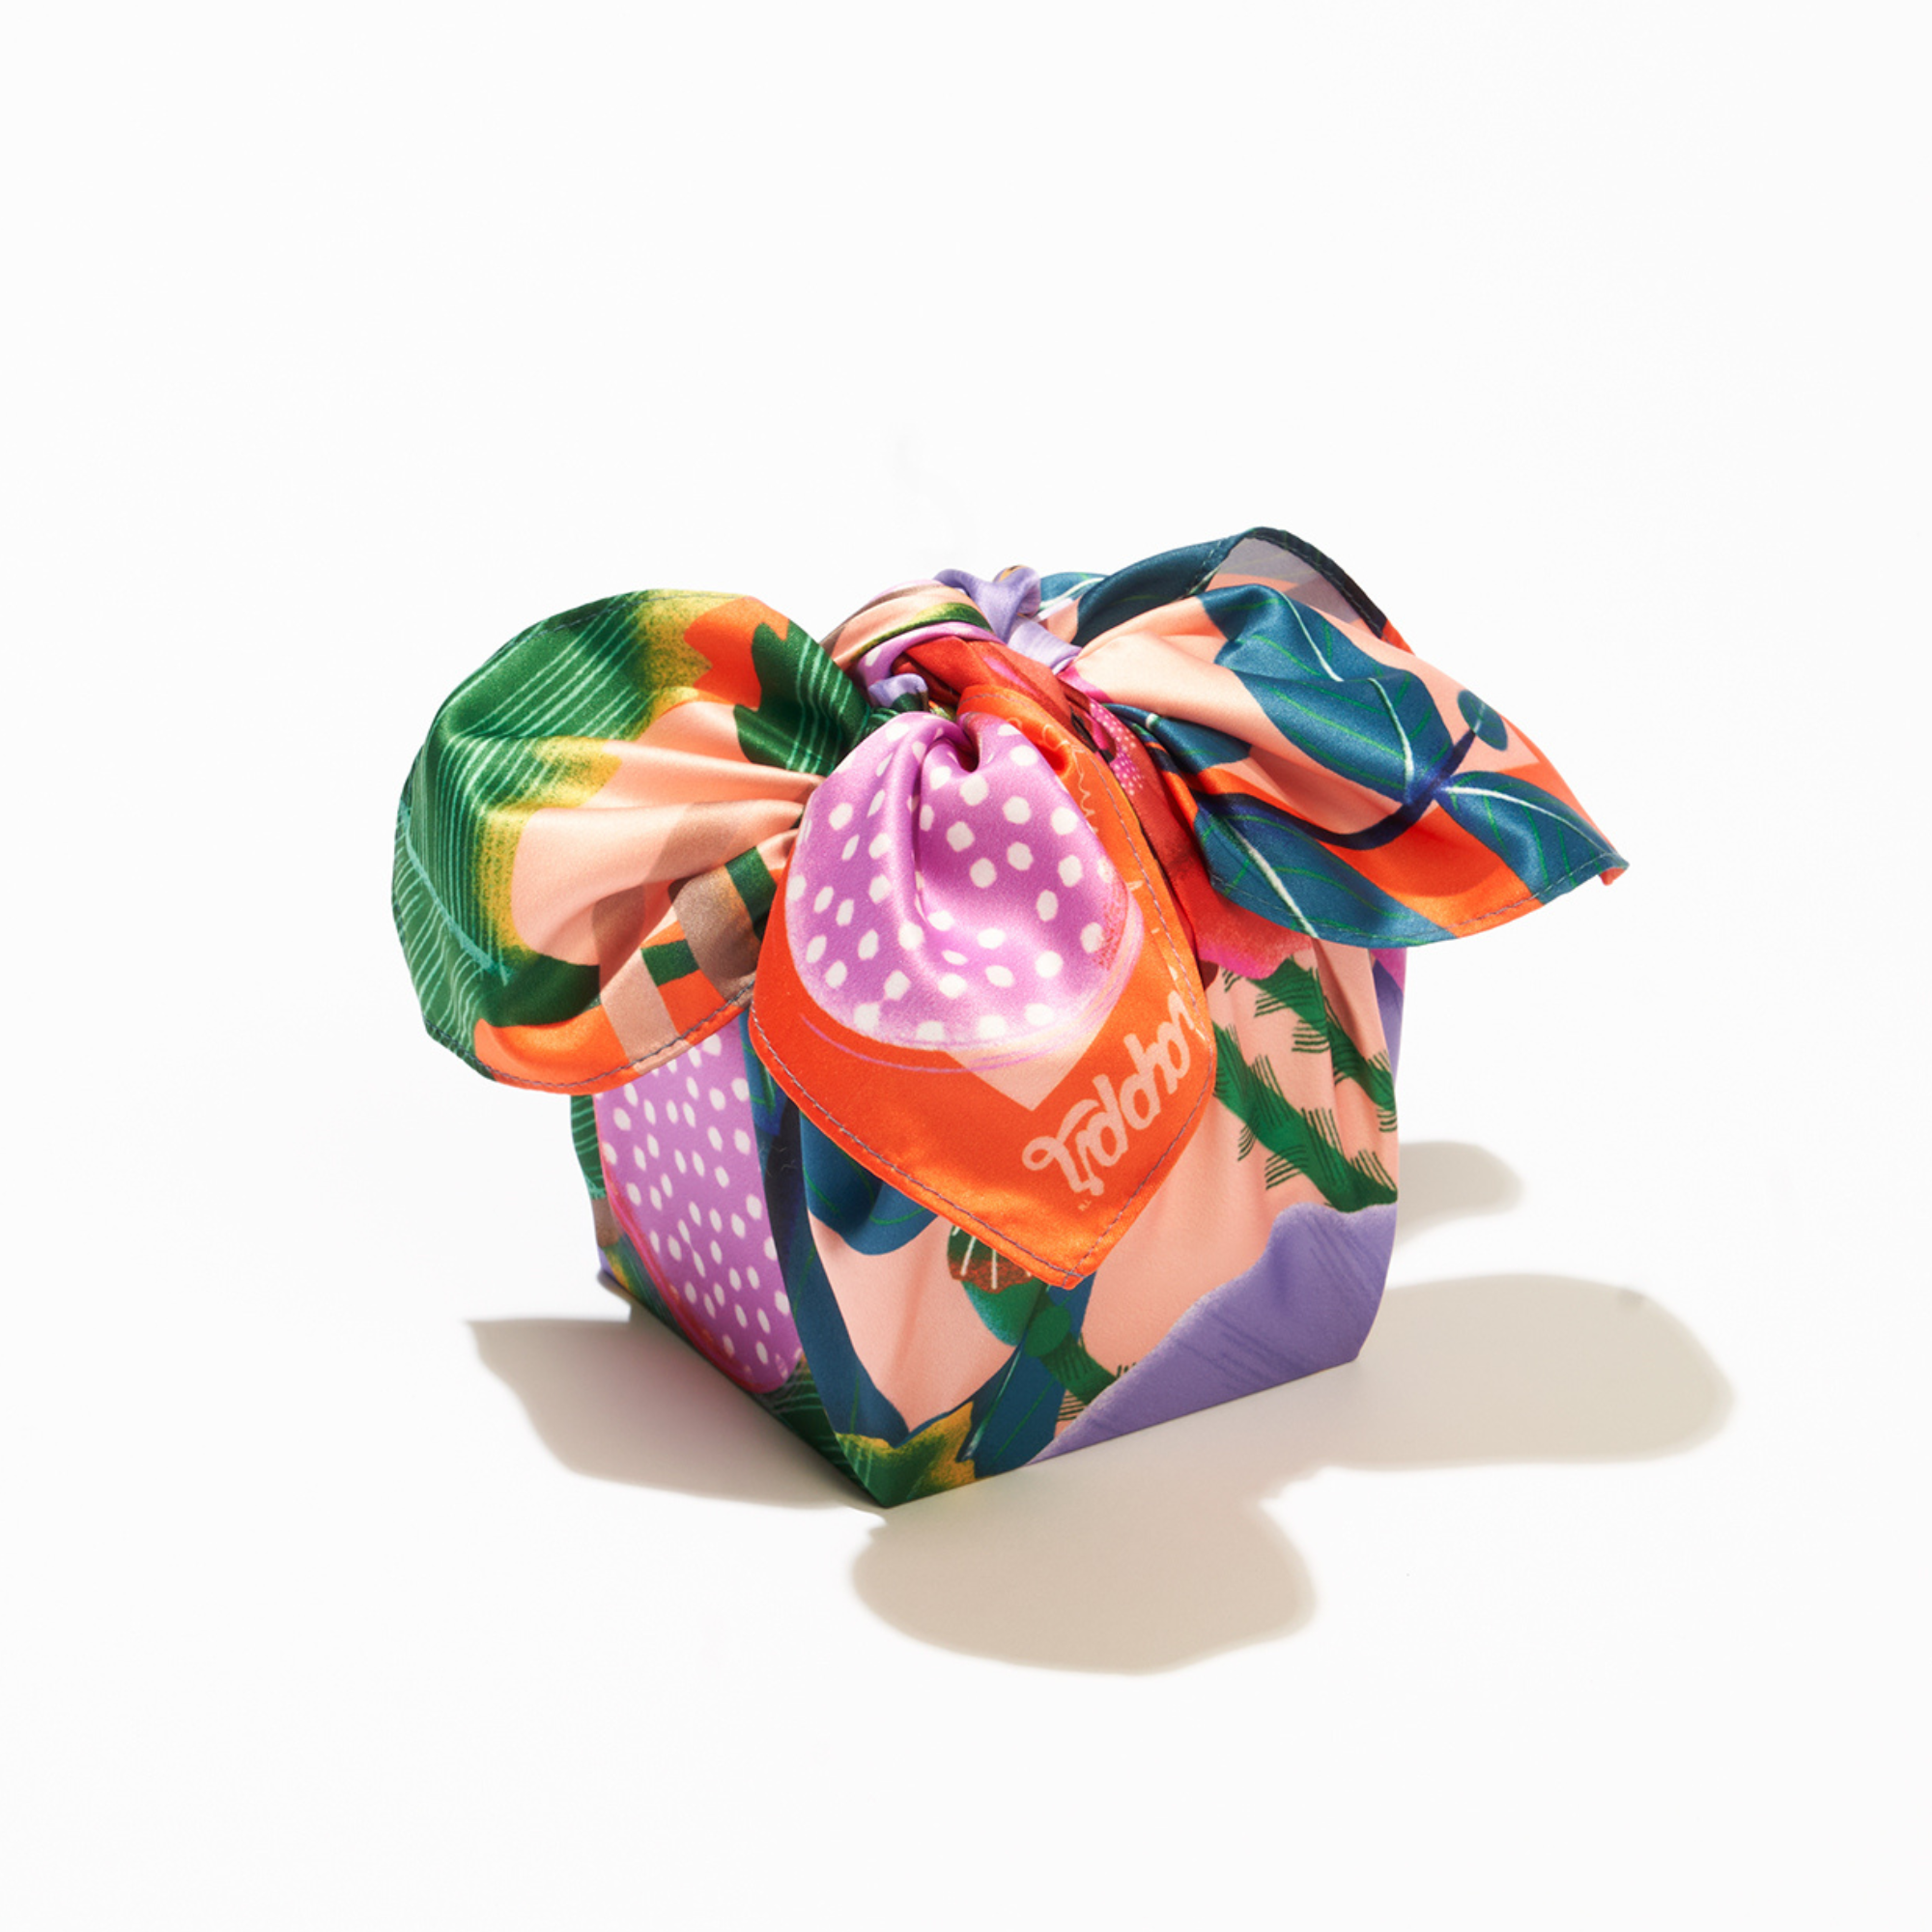 Daydream | 18" Furoshiki Wrap: Small - 46.5 cm. / 18" square / Recycled Polyester